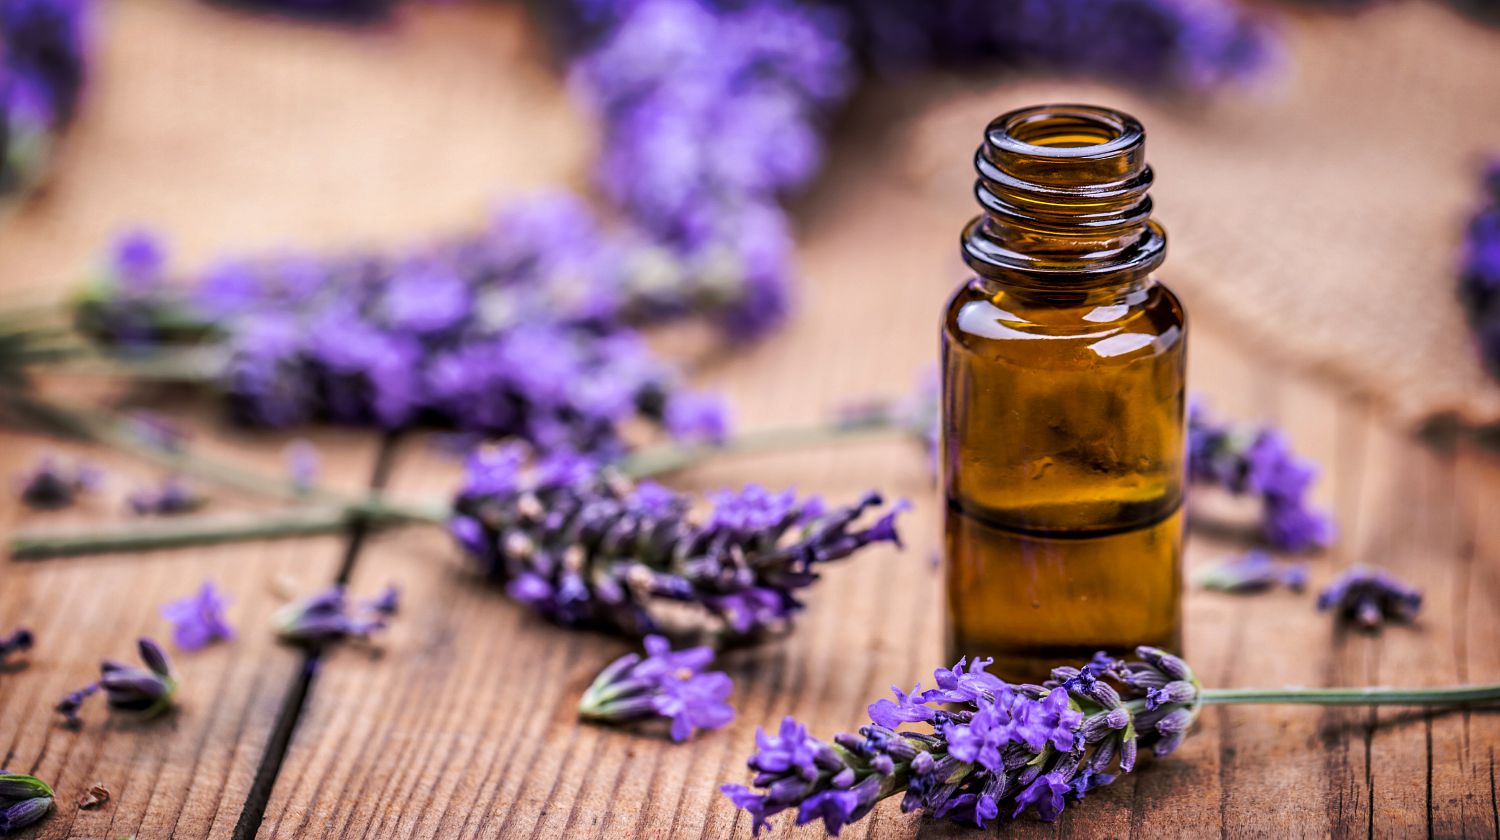 Feature | Herbal oil and lavender flowers on wooden background | Lavender Oil Survival Uses